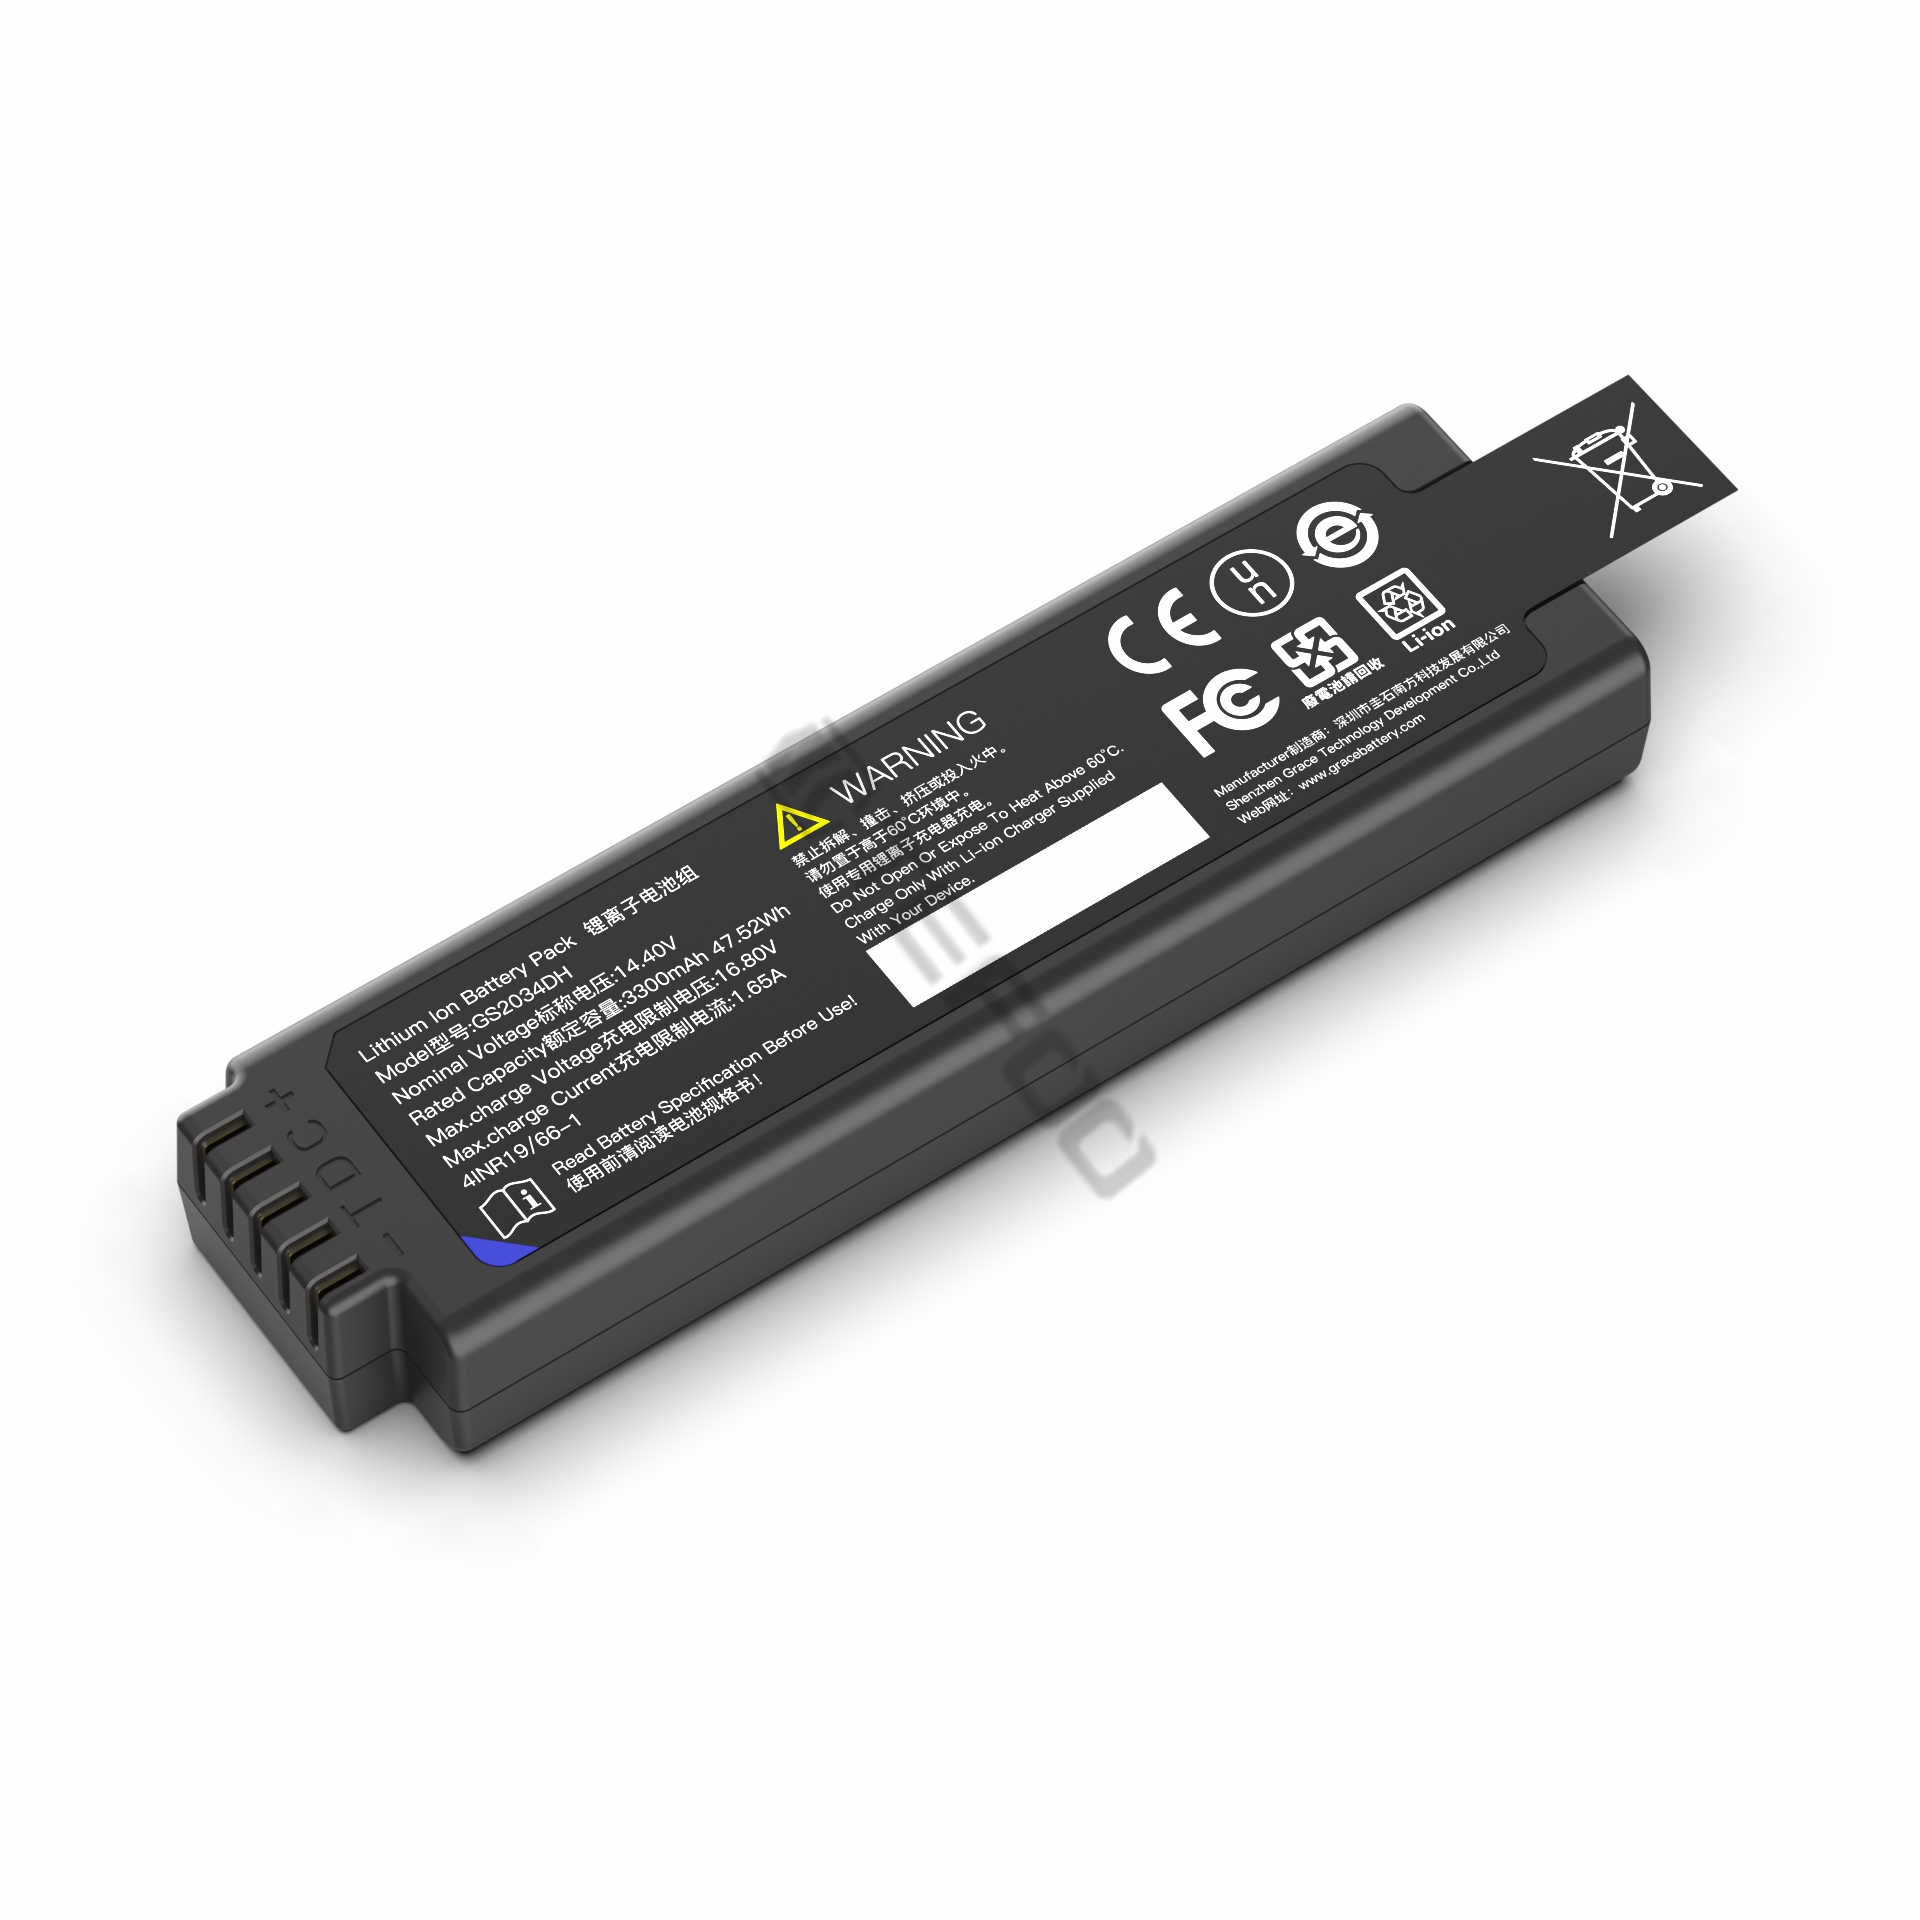 tefoo-standard-smart-battery-pack-GS2034DH-replacement-RRC-battery